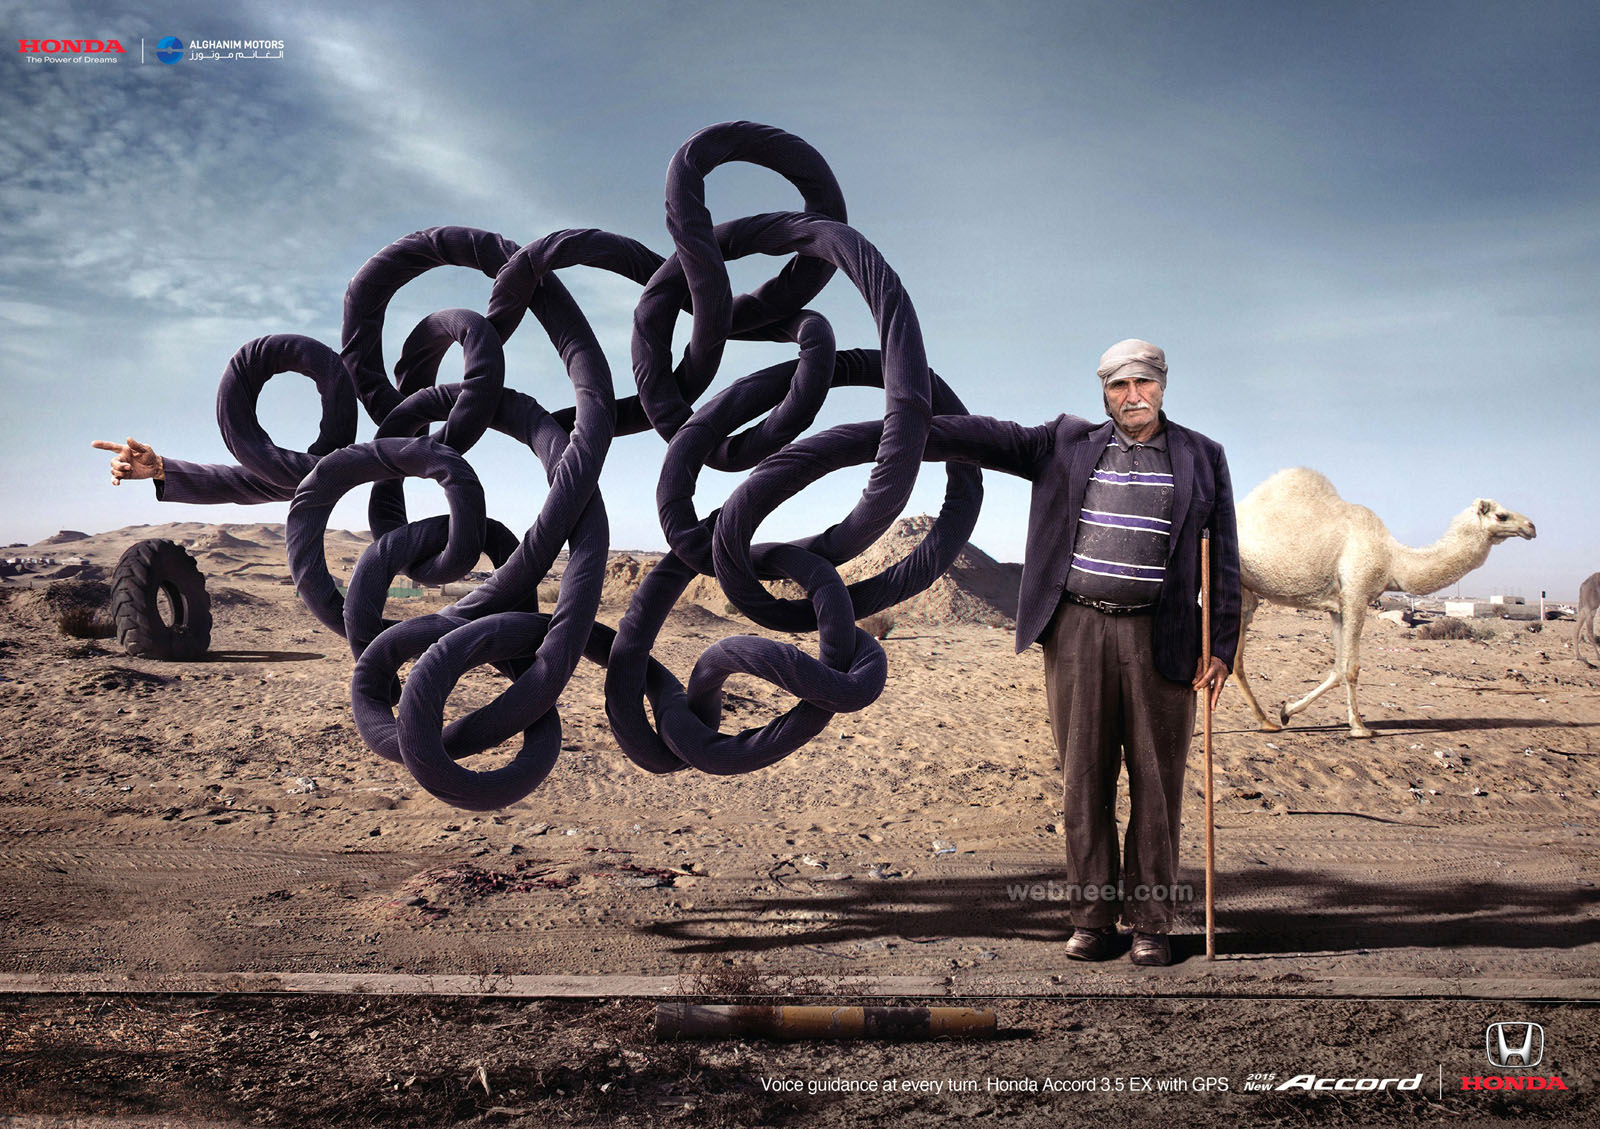 40 Best Print Advertisements And Creative Ads Design Inspiration